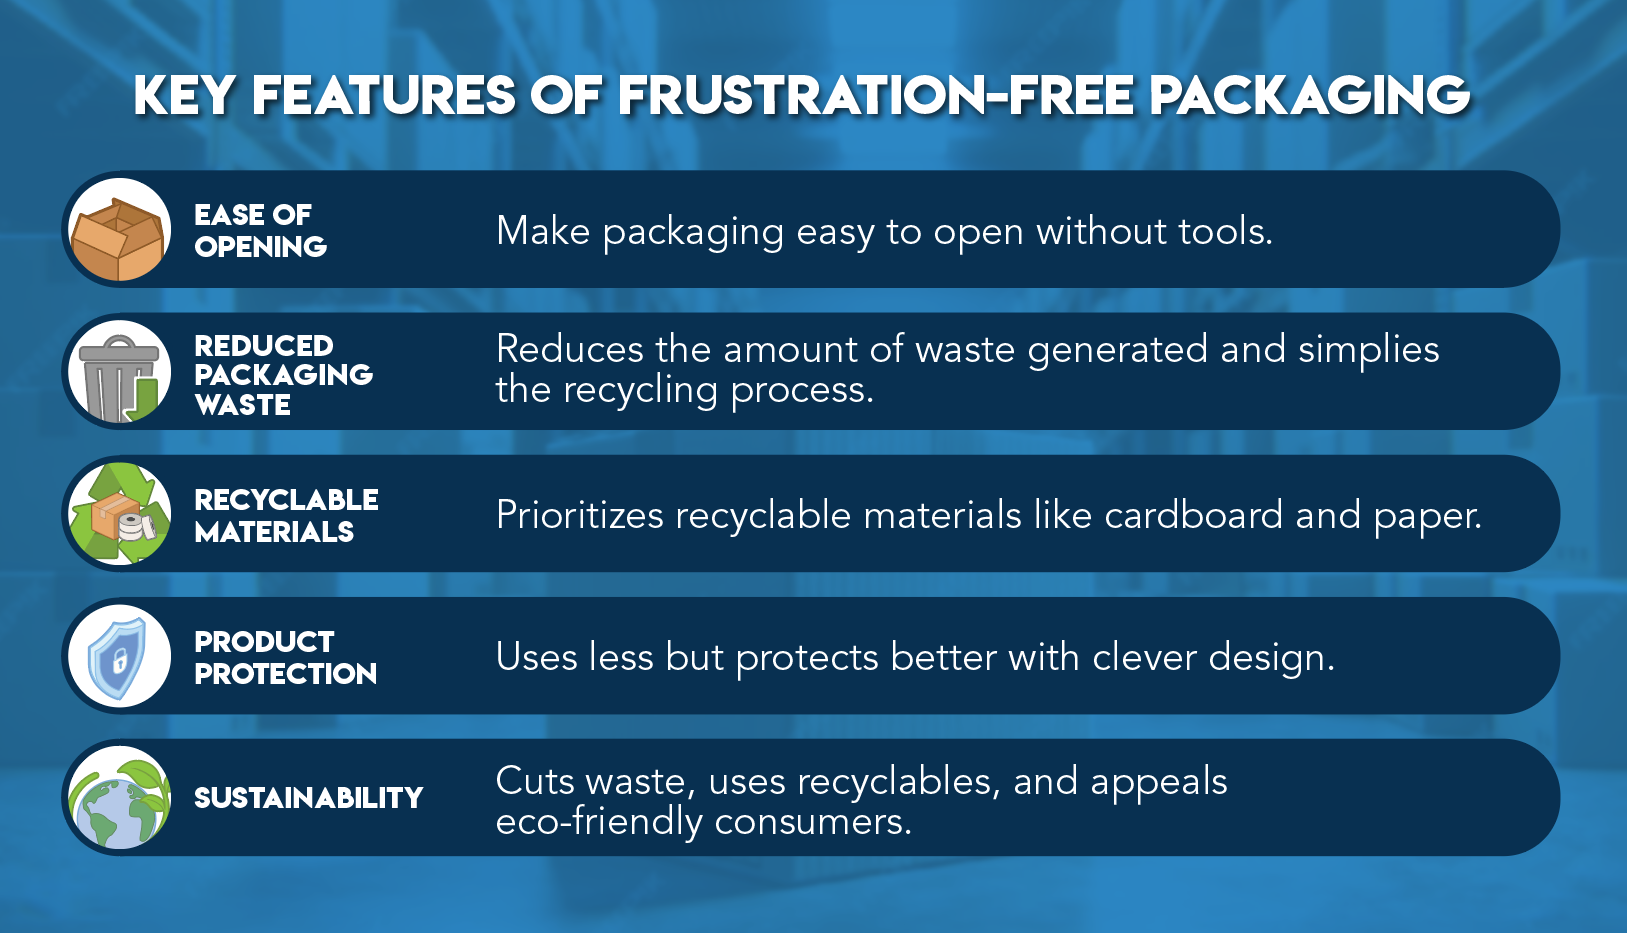 Key Features of Frustration-Free Packaging